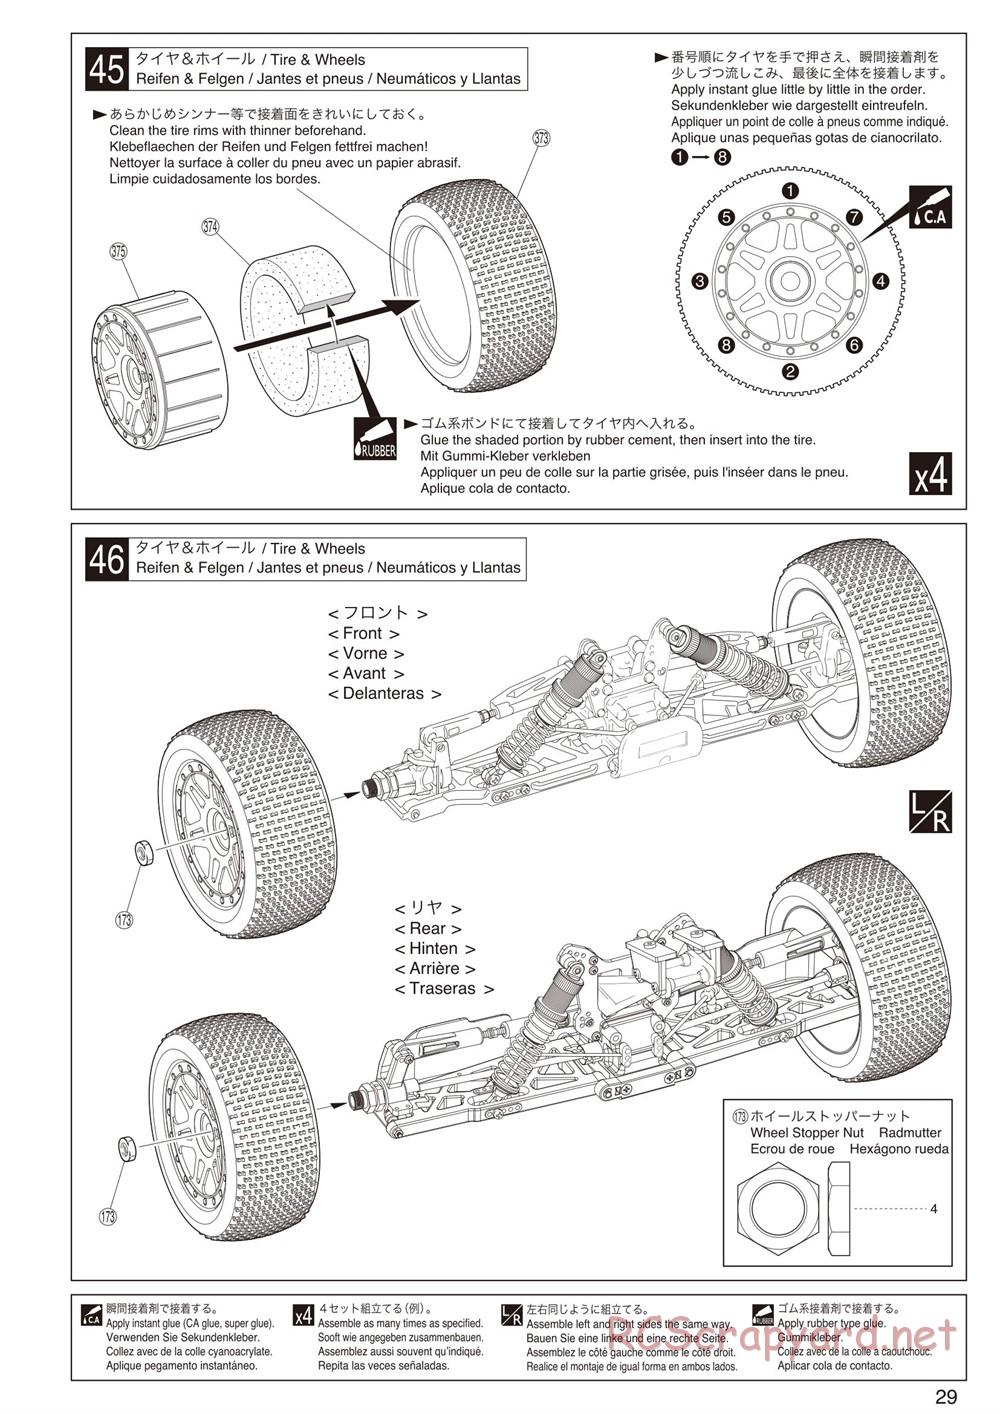 Kyosho - Inferno Neo ST - Manual - Page 29